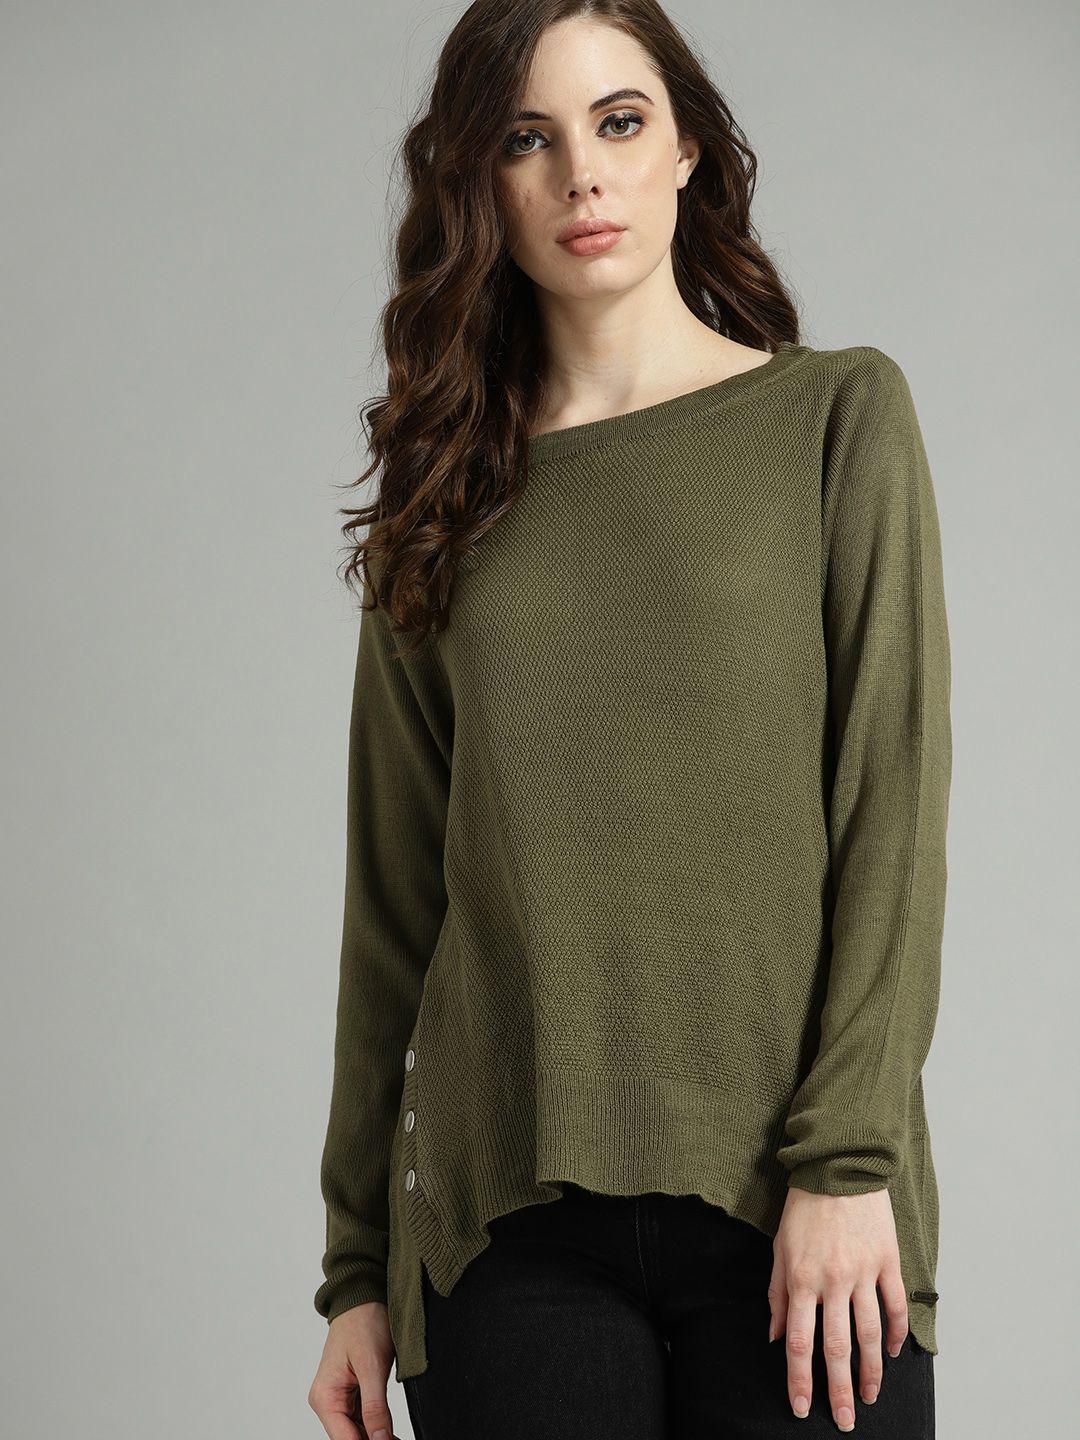 roadster-women-olive-green-solid-sweater